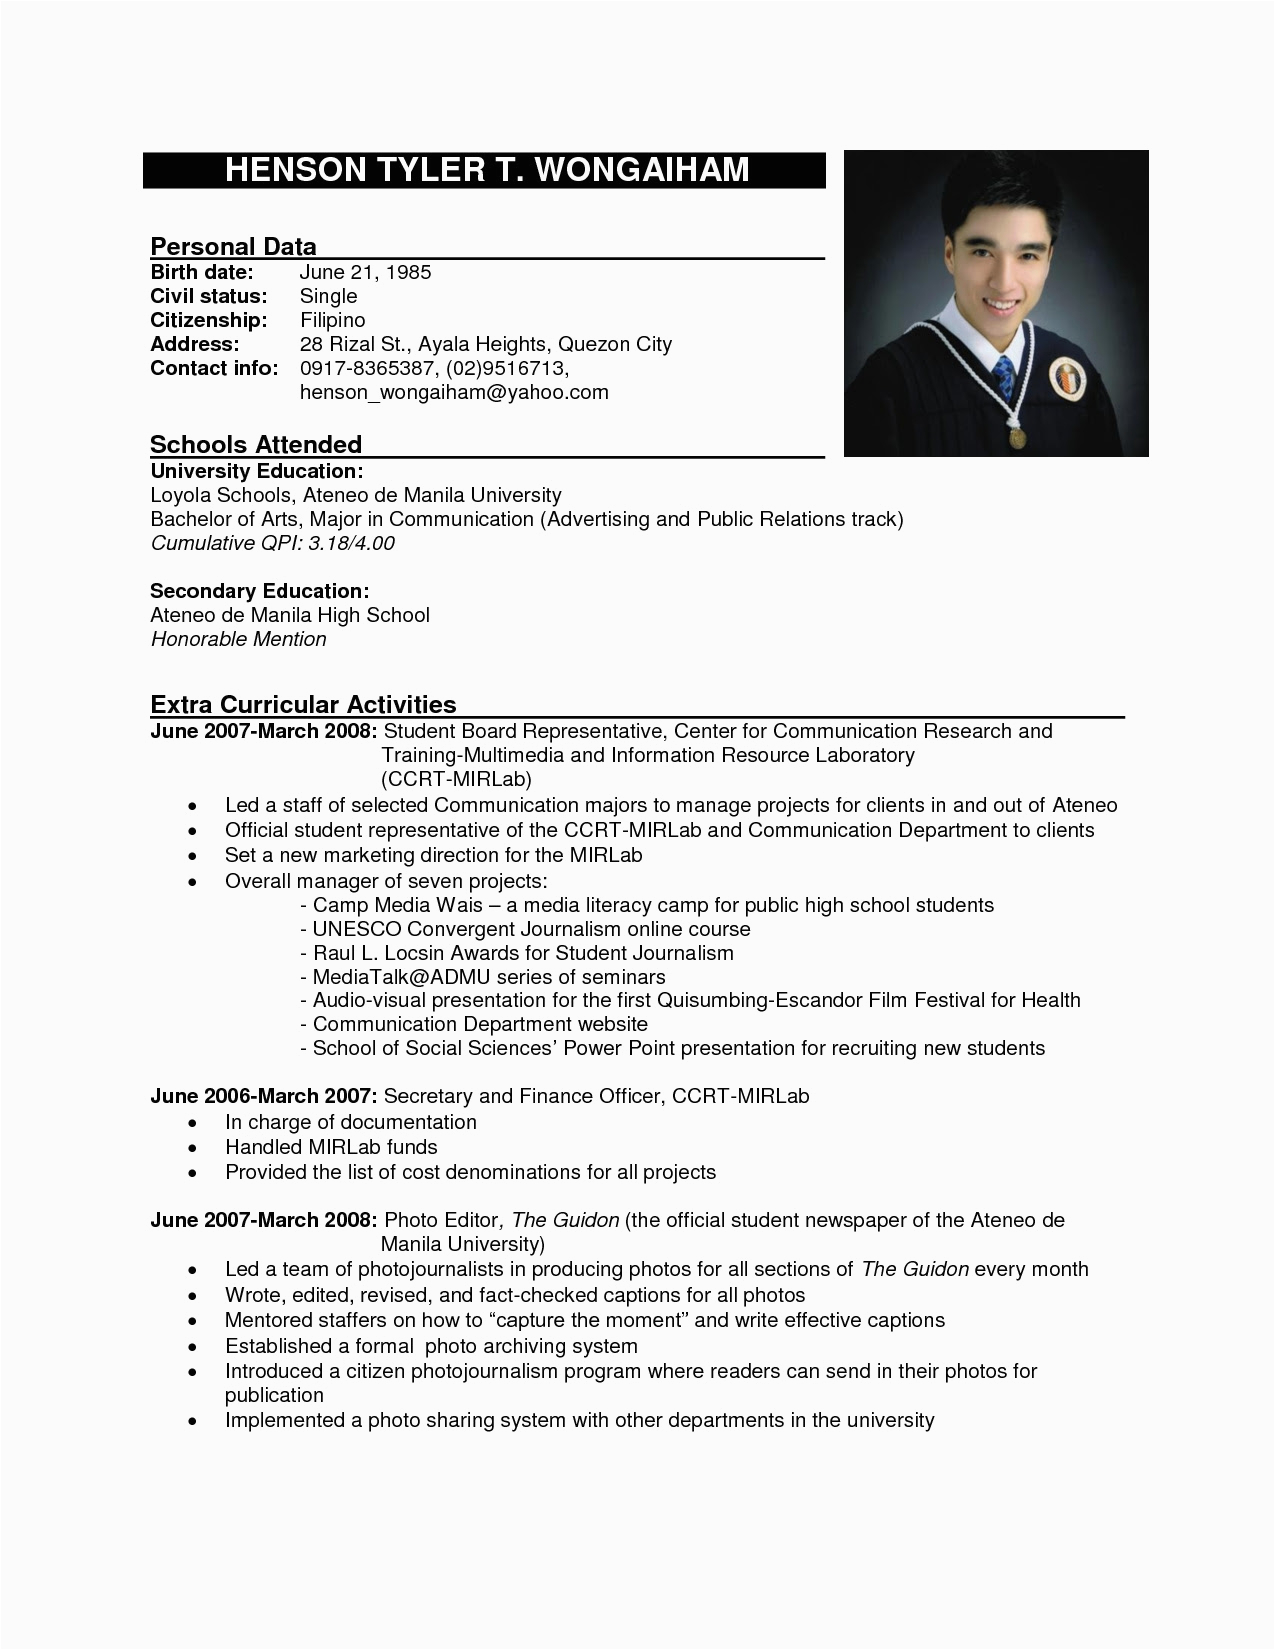 Resume Samples Example Of Resume to Apply Job Sample Cv for Job Application Philippines Sample Resume format